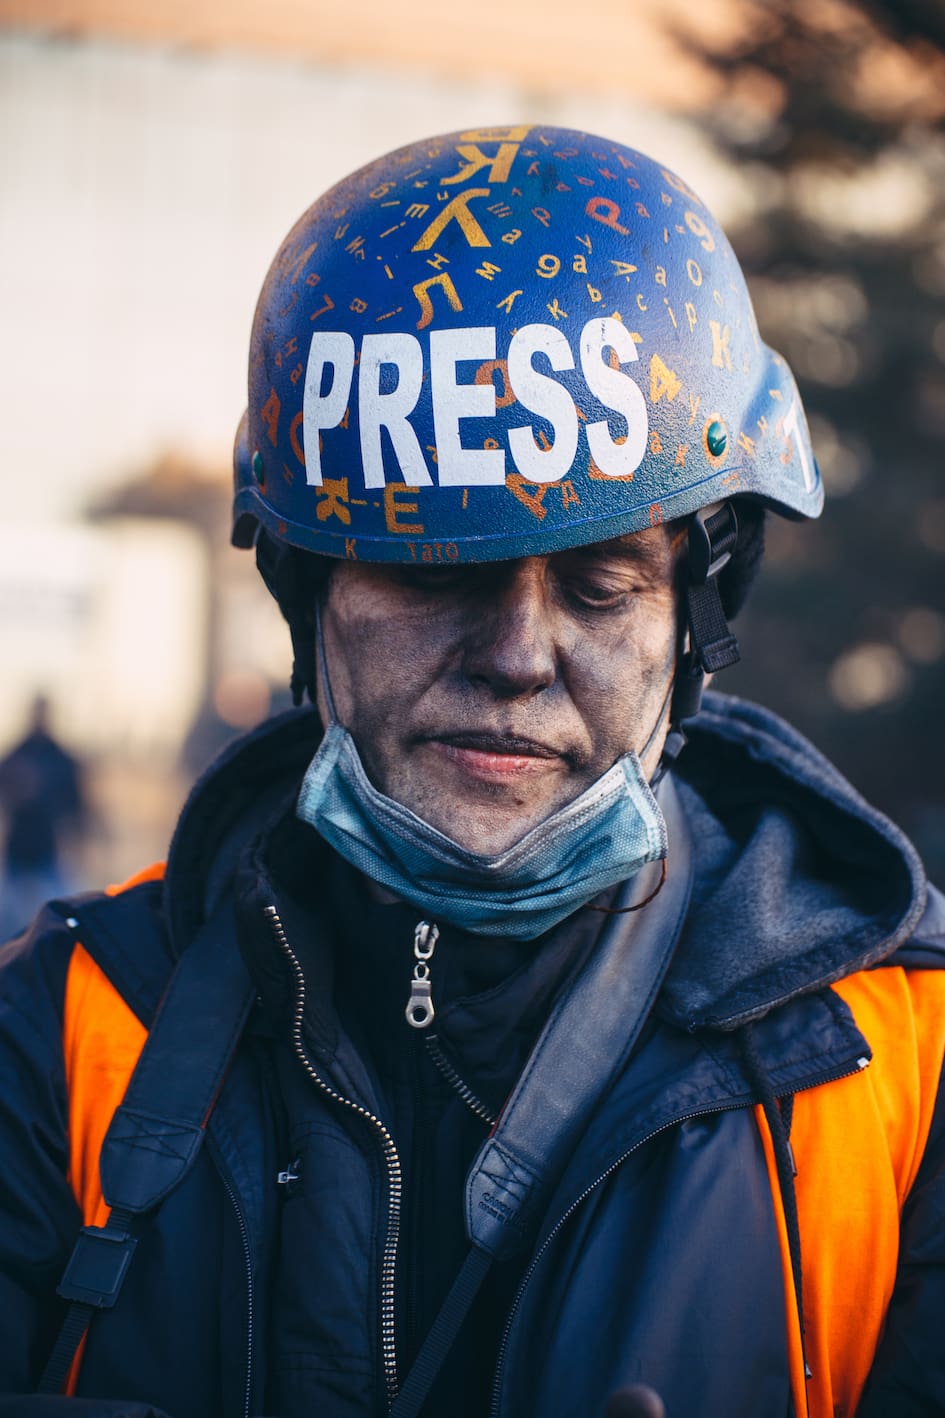 World Press Freedom Day 2021: Media Defence Reflects on Current Trends Threatening Media Freedom